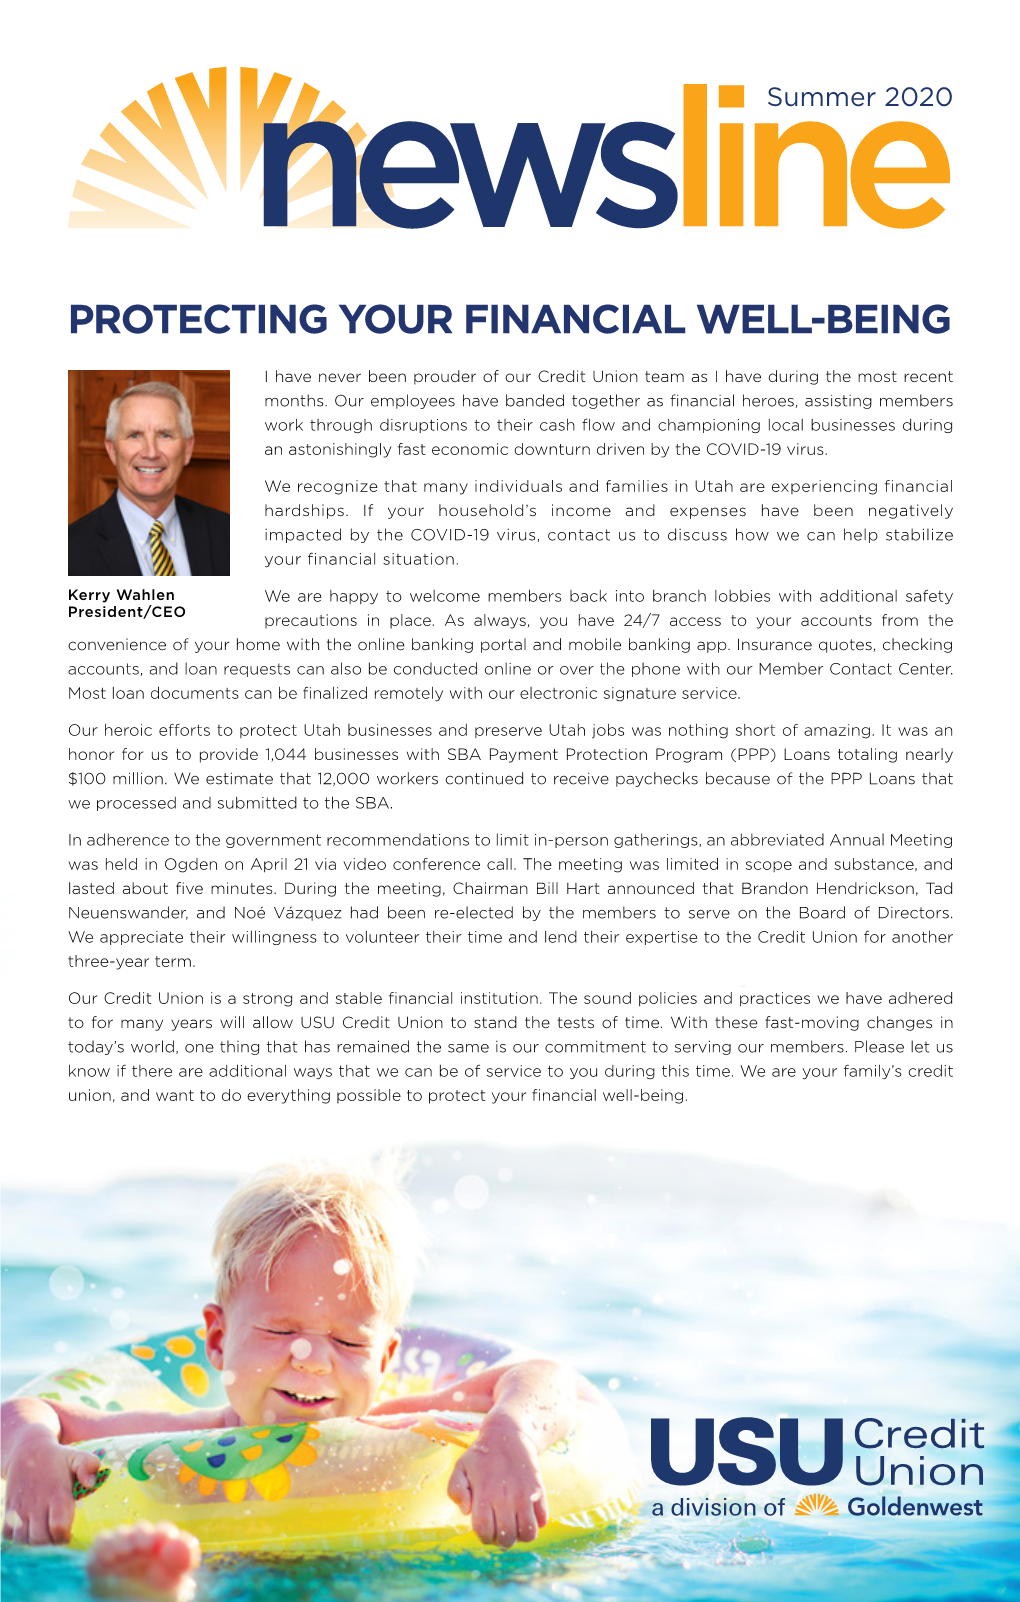 Protecting Your Financial Well-Being